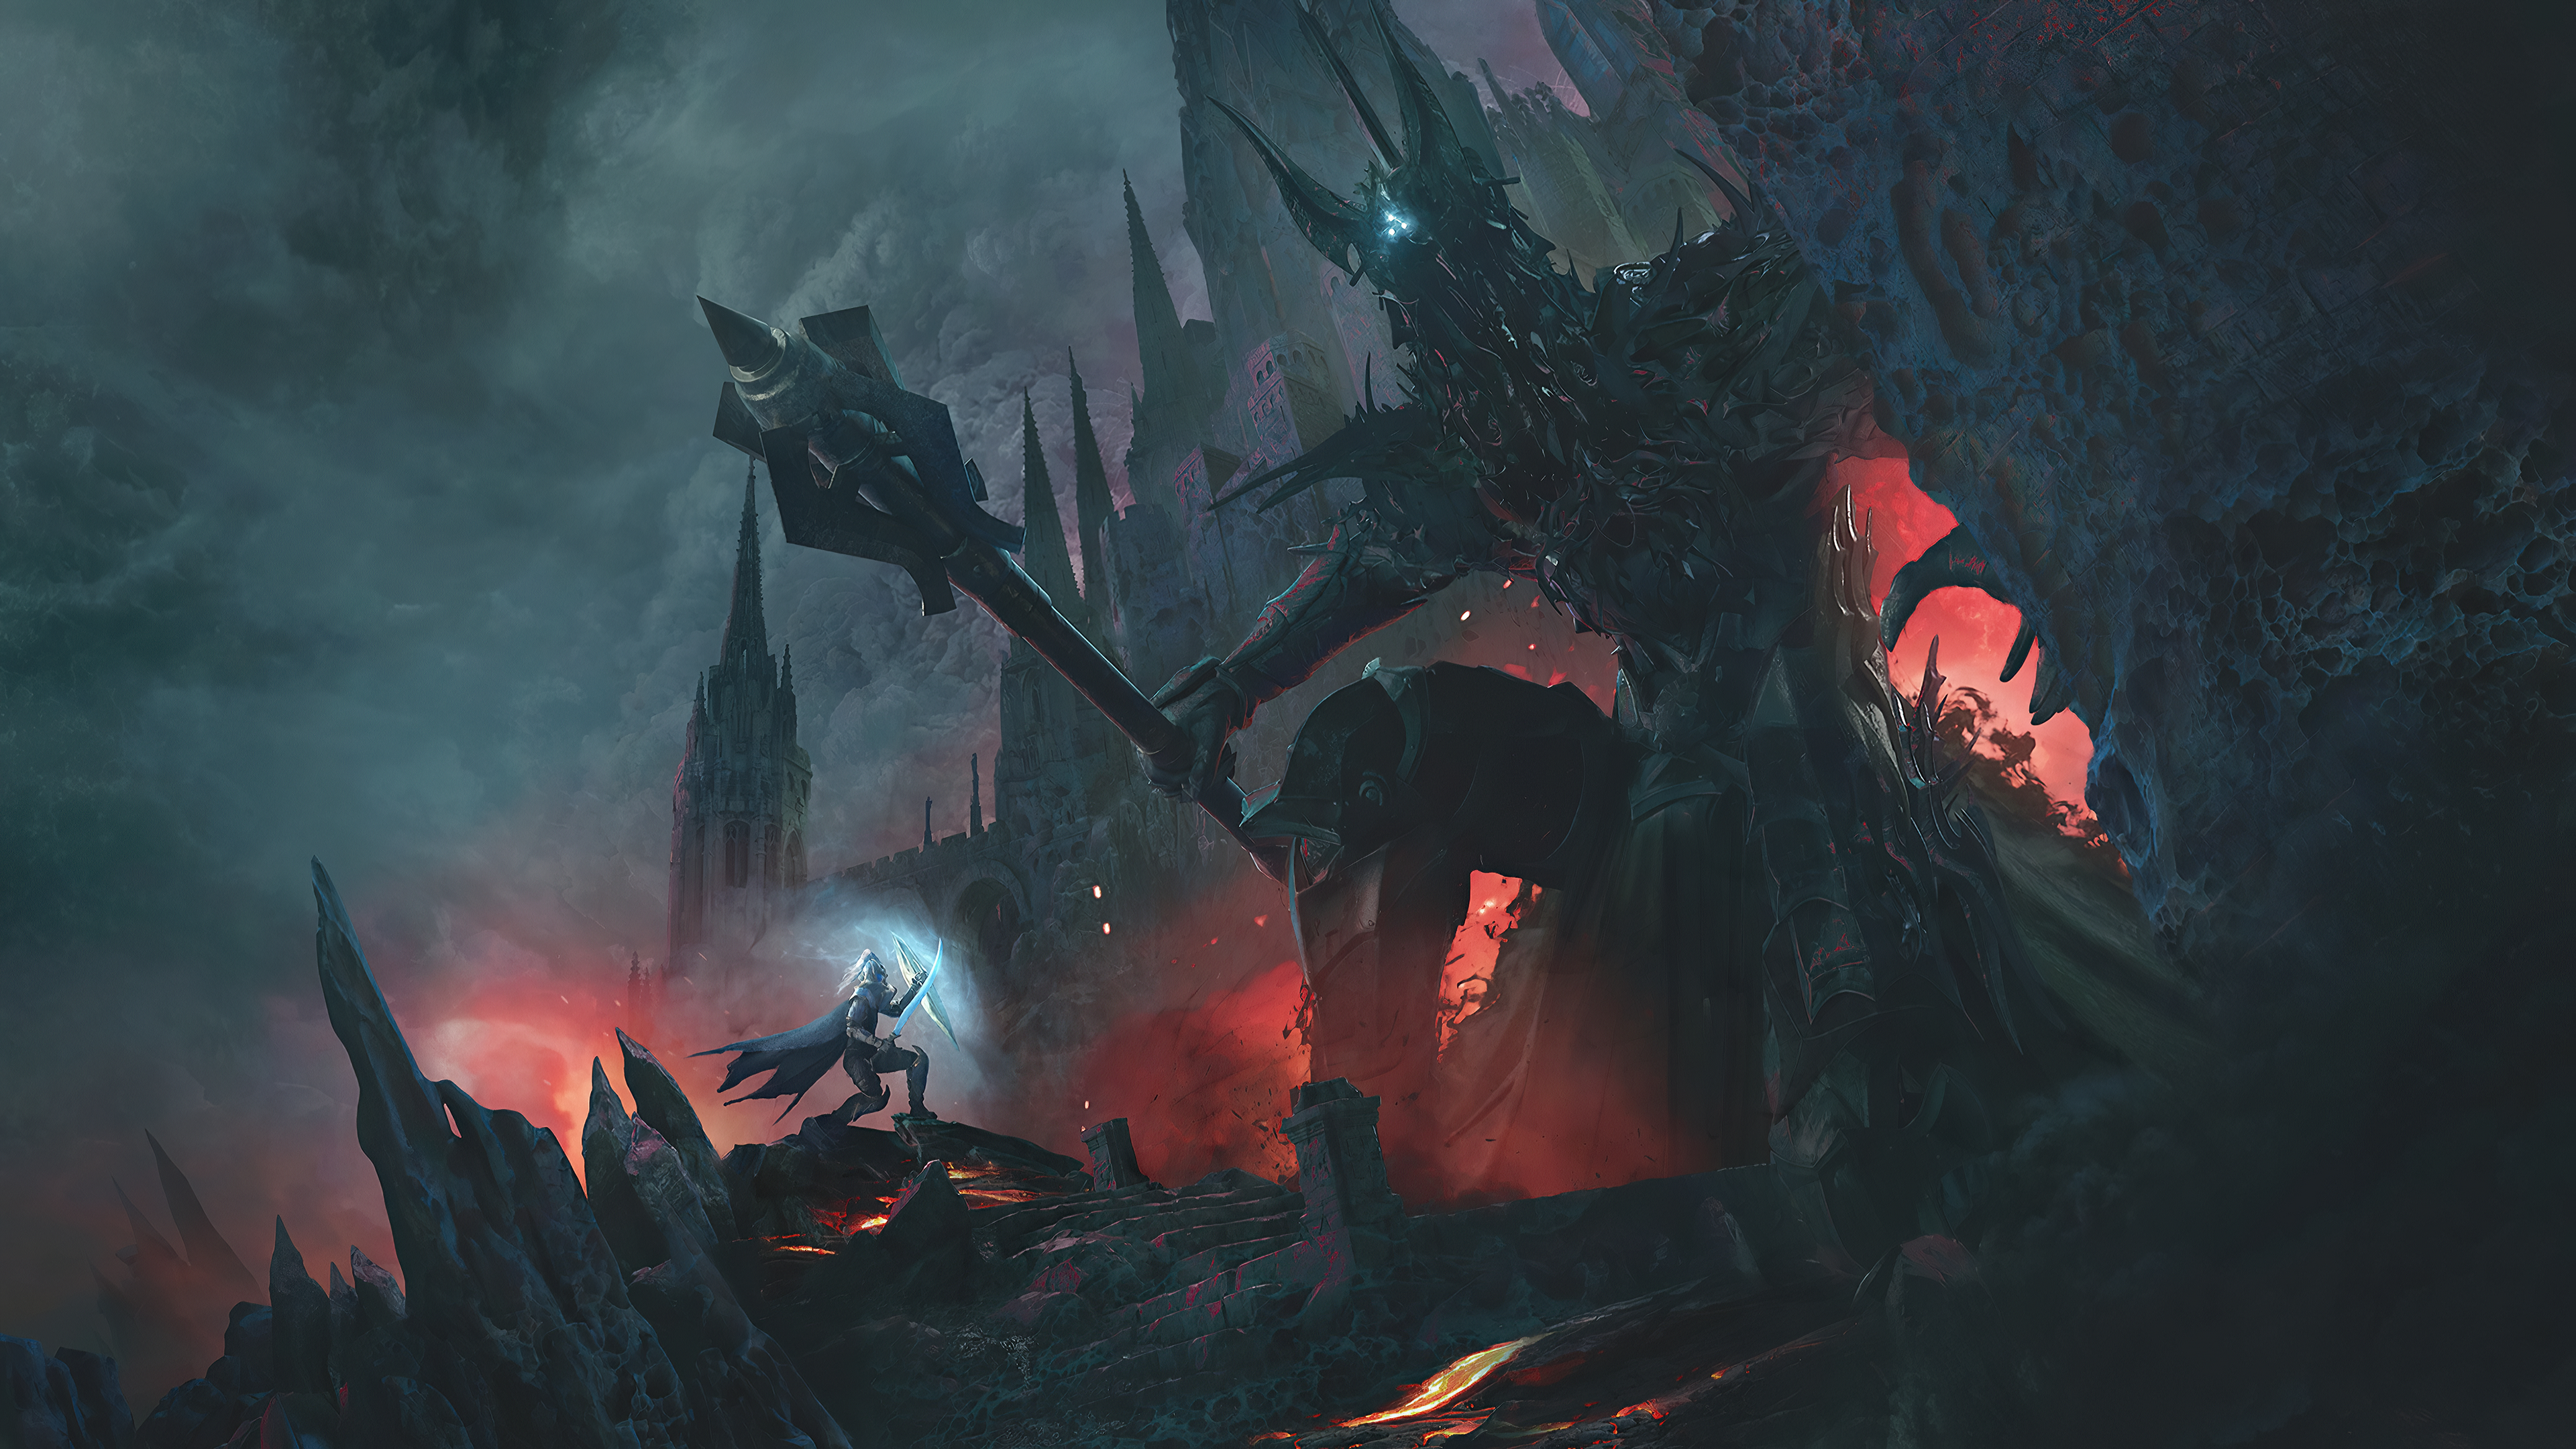 Lord of the rings lore, jrr tolkien lore, the throne room of morgoth, deep  within the fortress of angband, a place of utmost fear and horror, with  brightly lit fires, horrible pillars